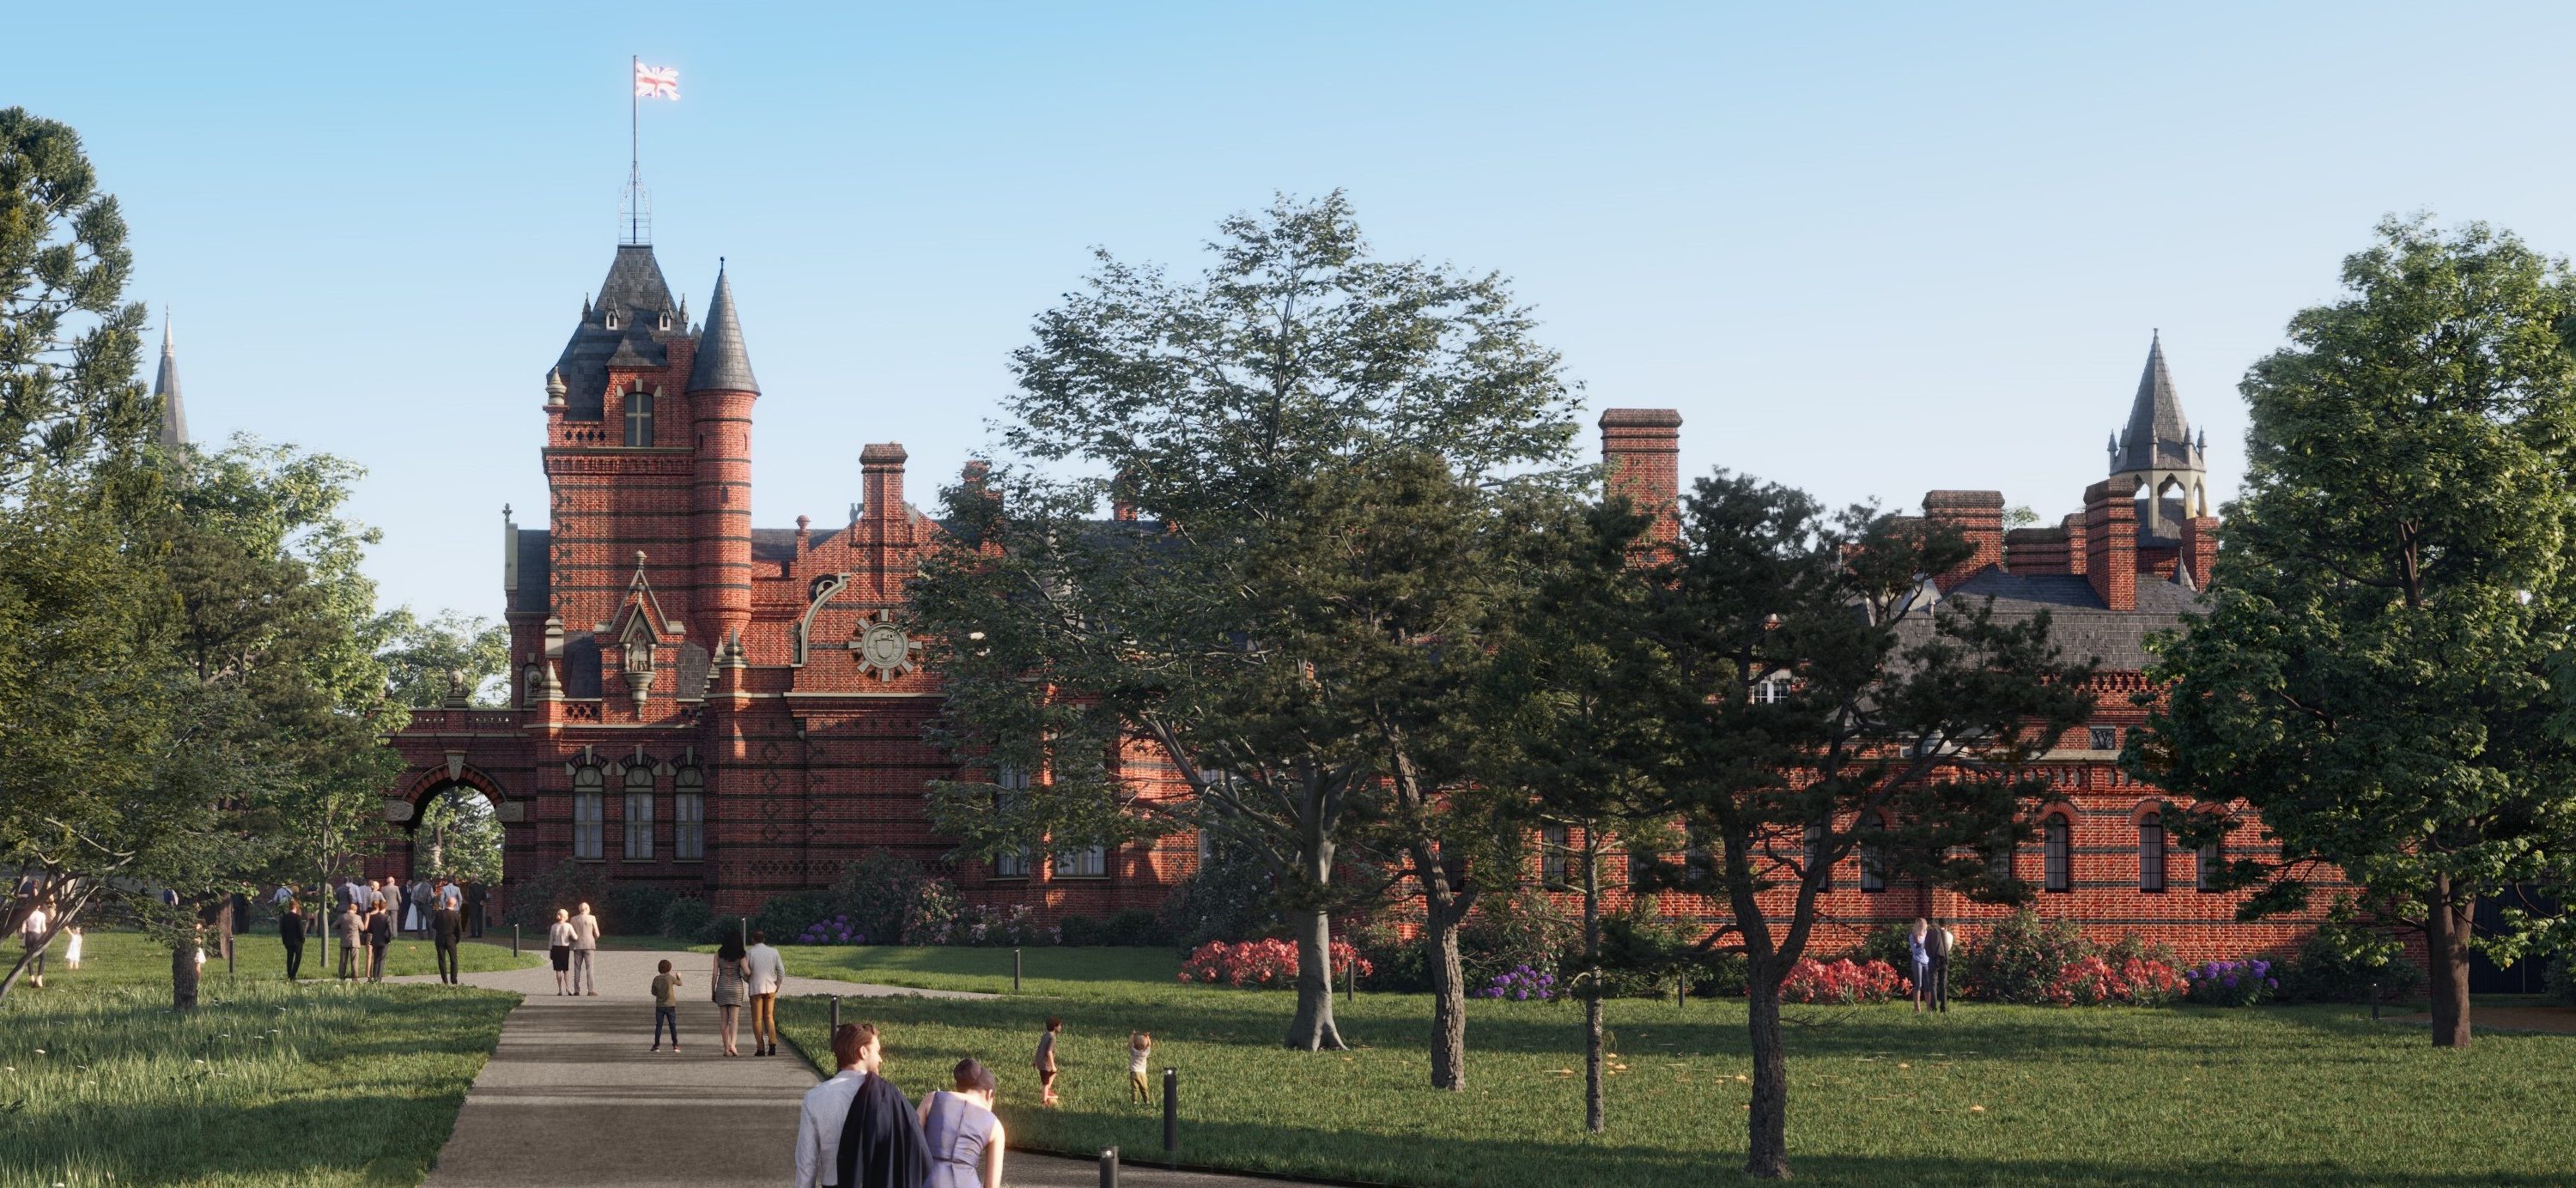 The Elvetham Hotel_Heritage_Image_Planning Permission_Bell Cornwell_Planning Consultants_Krause_Architects_2 - Copy